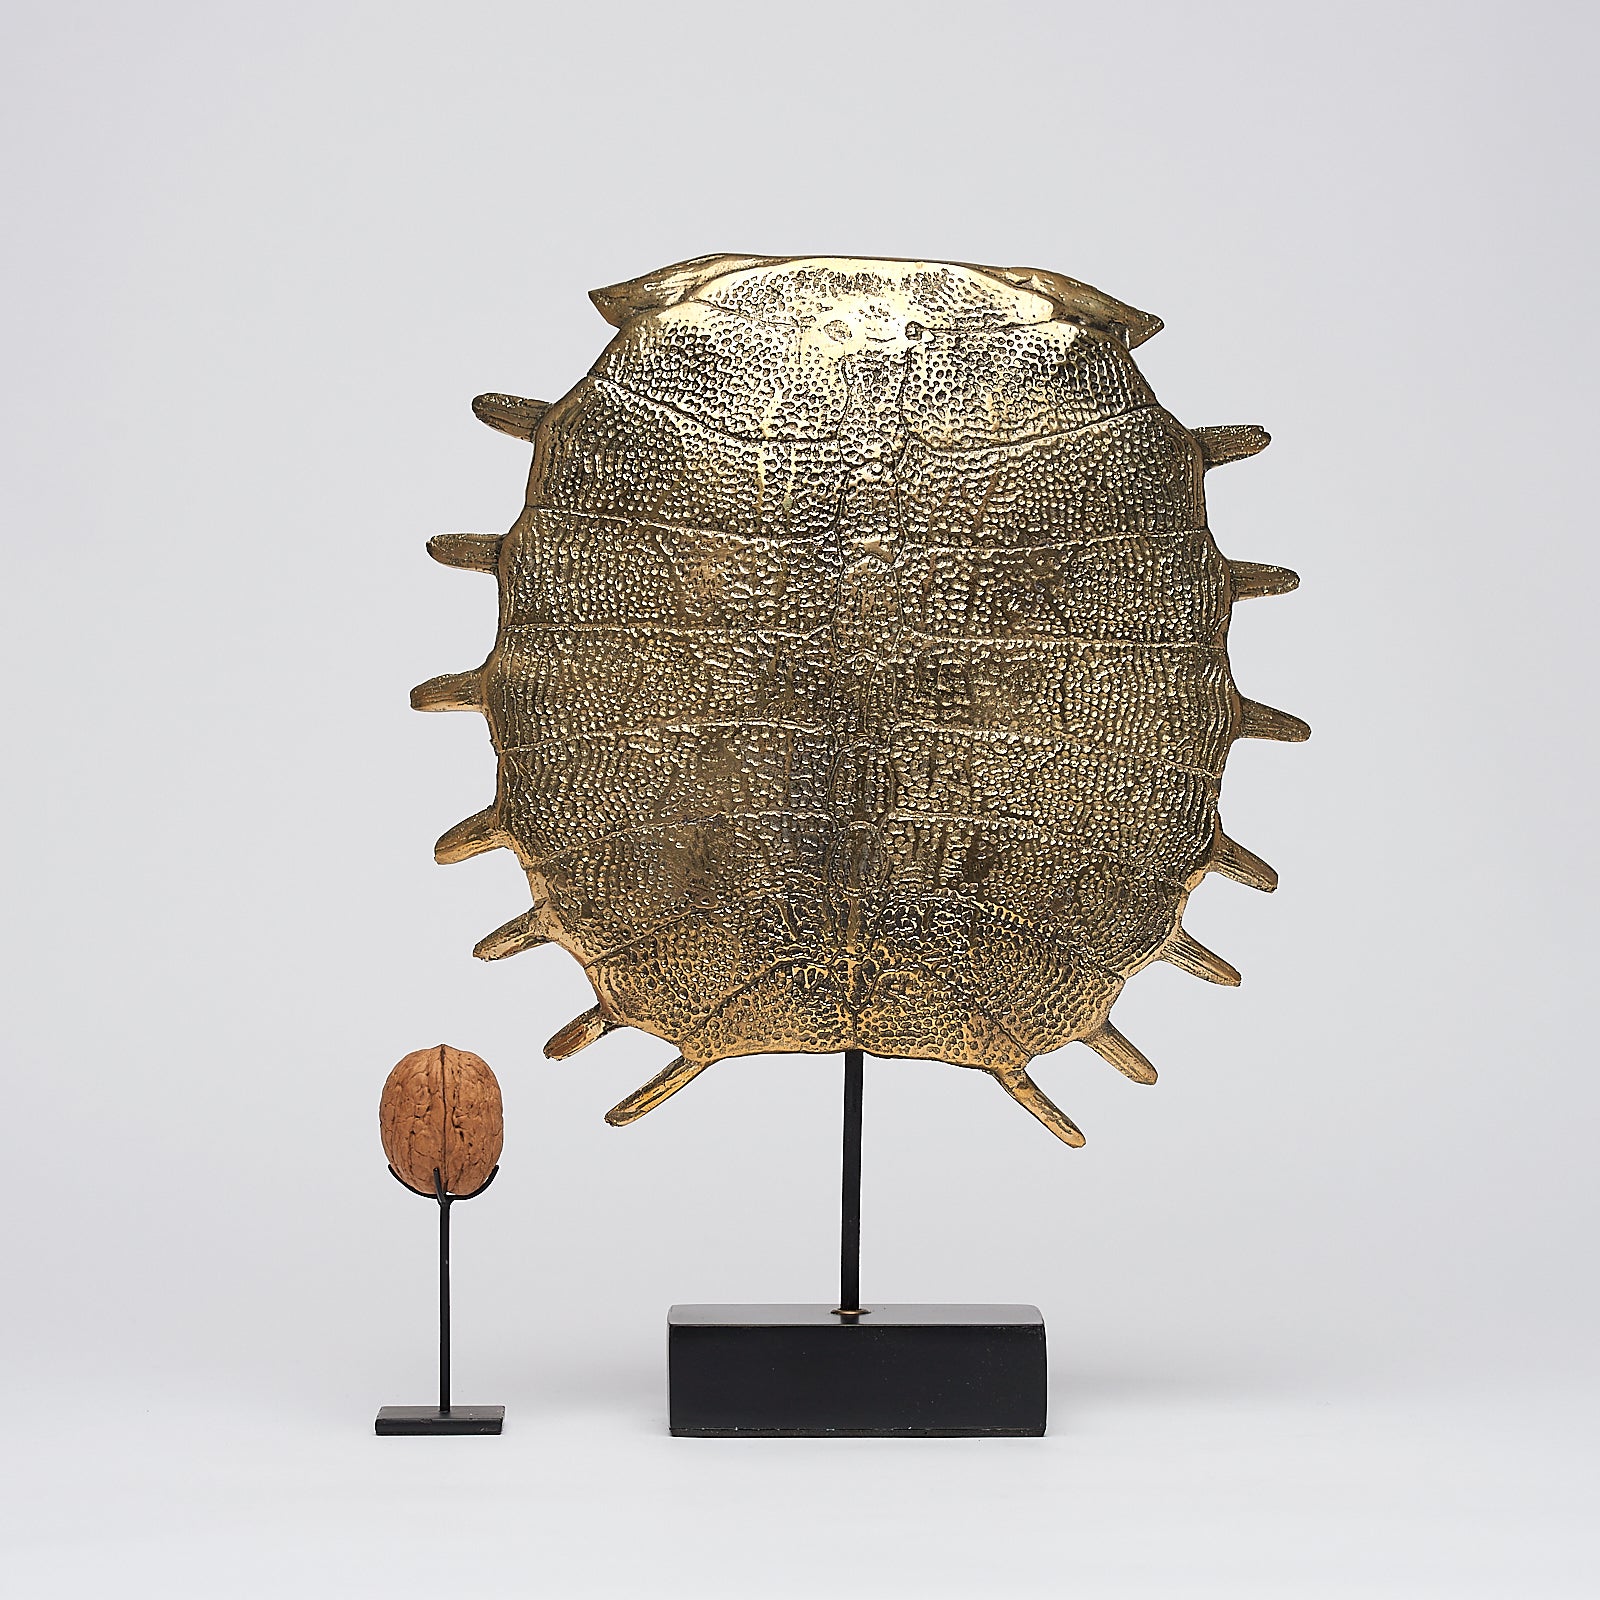 Medium Turtle Shell in polished bronze